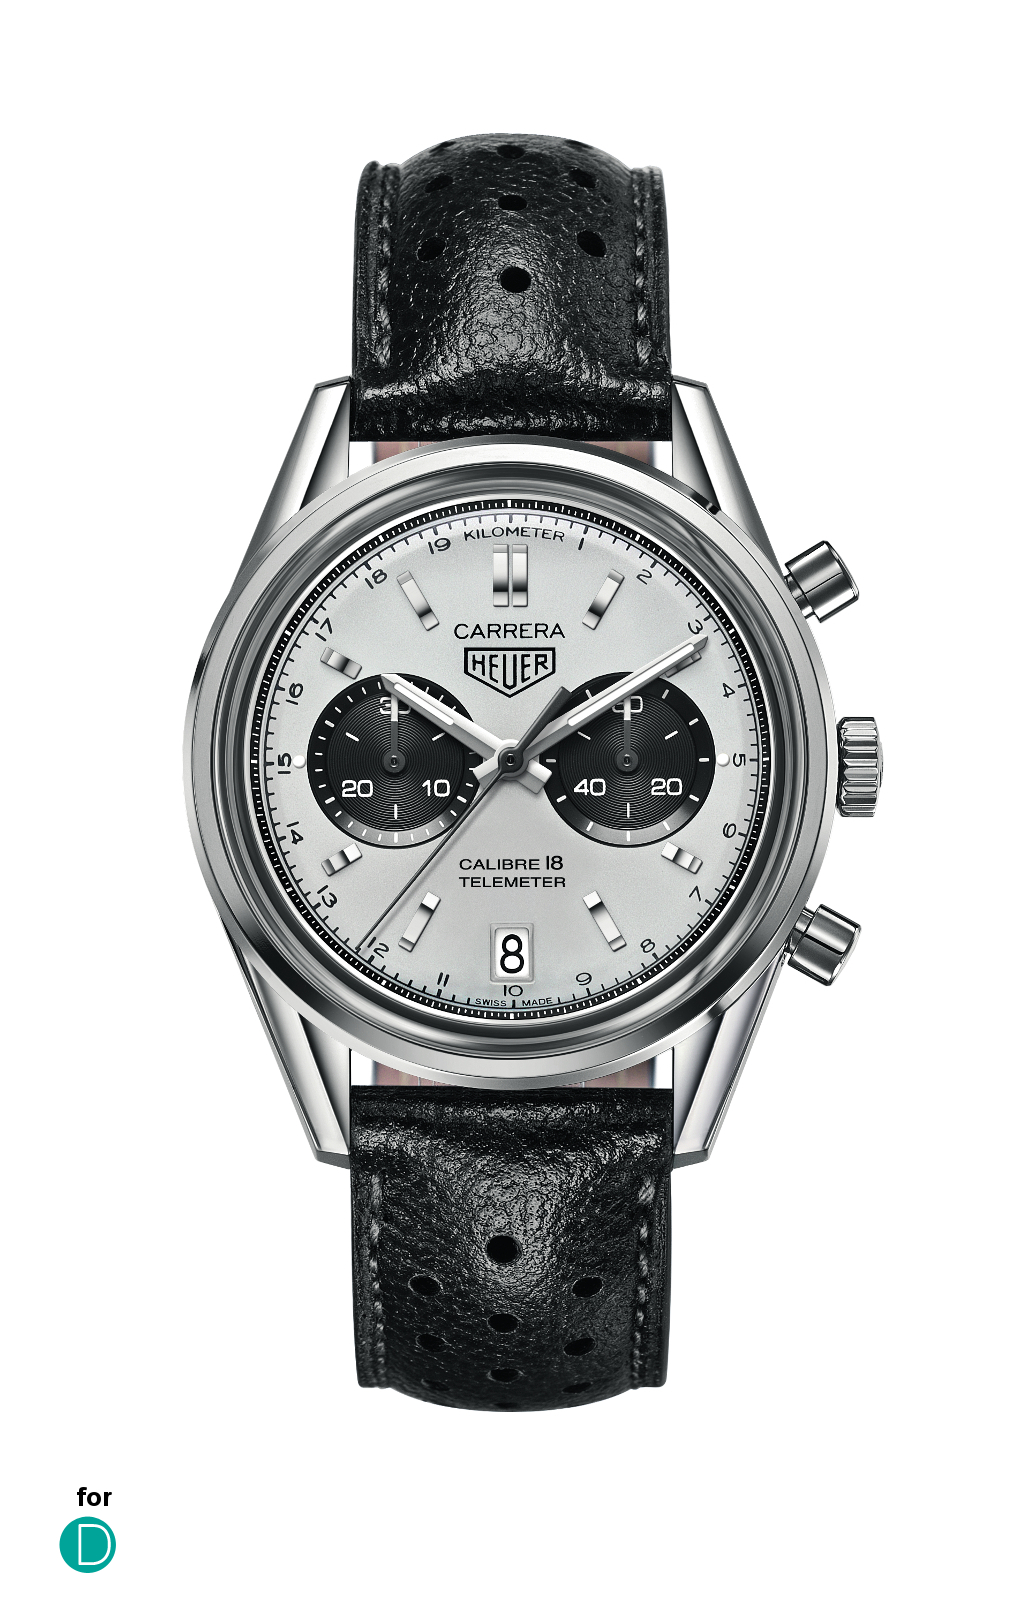 The Tag Heuer Carrera Calibre 18, a chronograph that features a date display at the 6 o'clock position.